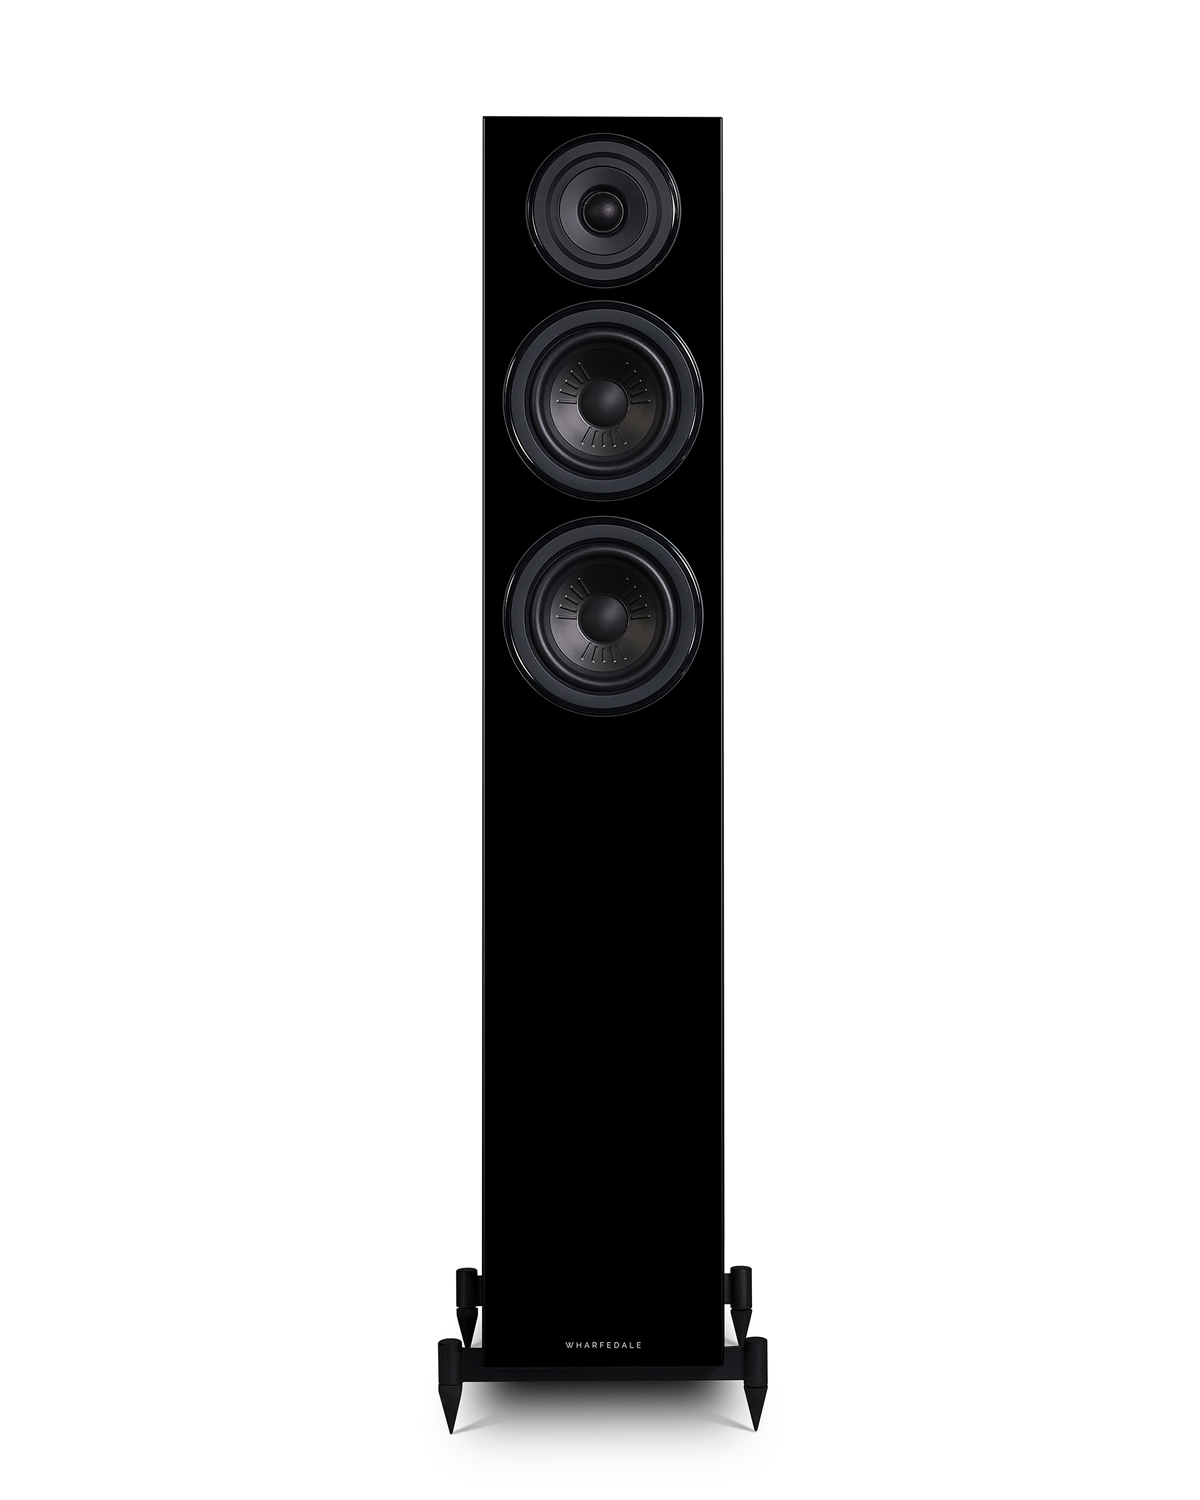 The more compact of the Wharfedale DIAMOND 12 series floorstanding options, the DIAMOND 12.3 loses none of the accuracy and musicality of the standmount (bookshelf) options. With enhanced presence and power, the DIAMOND 12.3 is refined and the perfect, affordable floorstanding speaker for 2-channel hi-fi systems